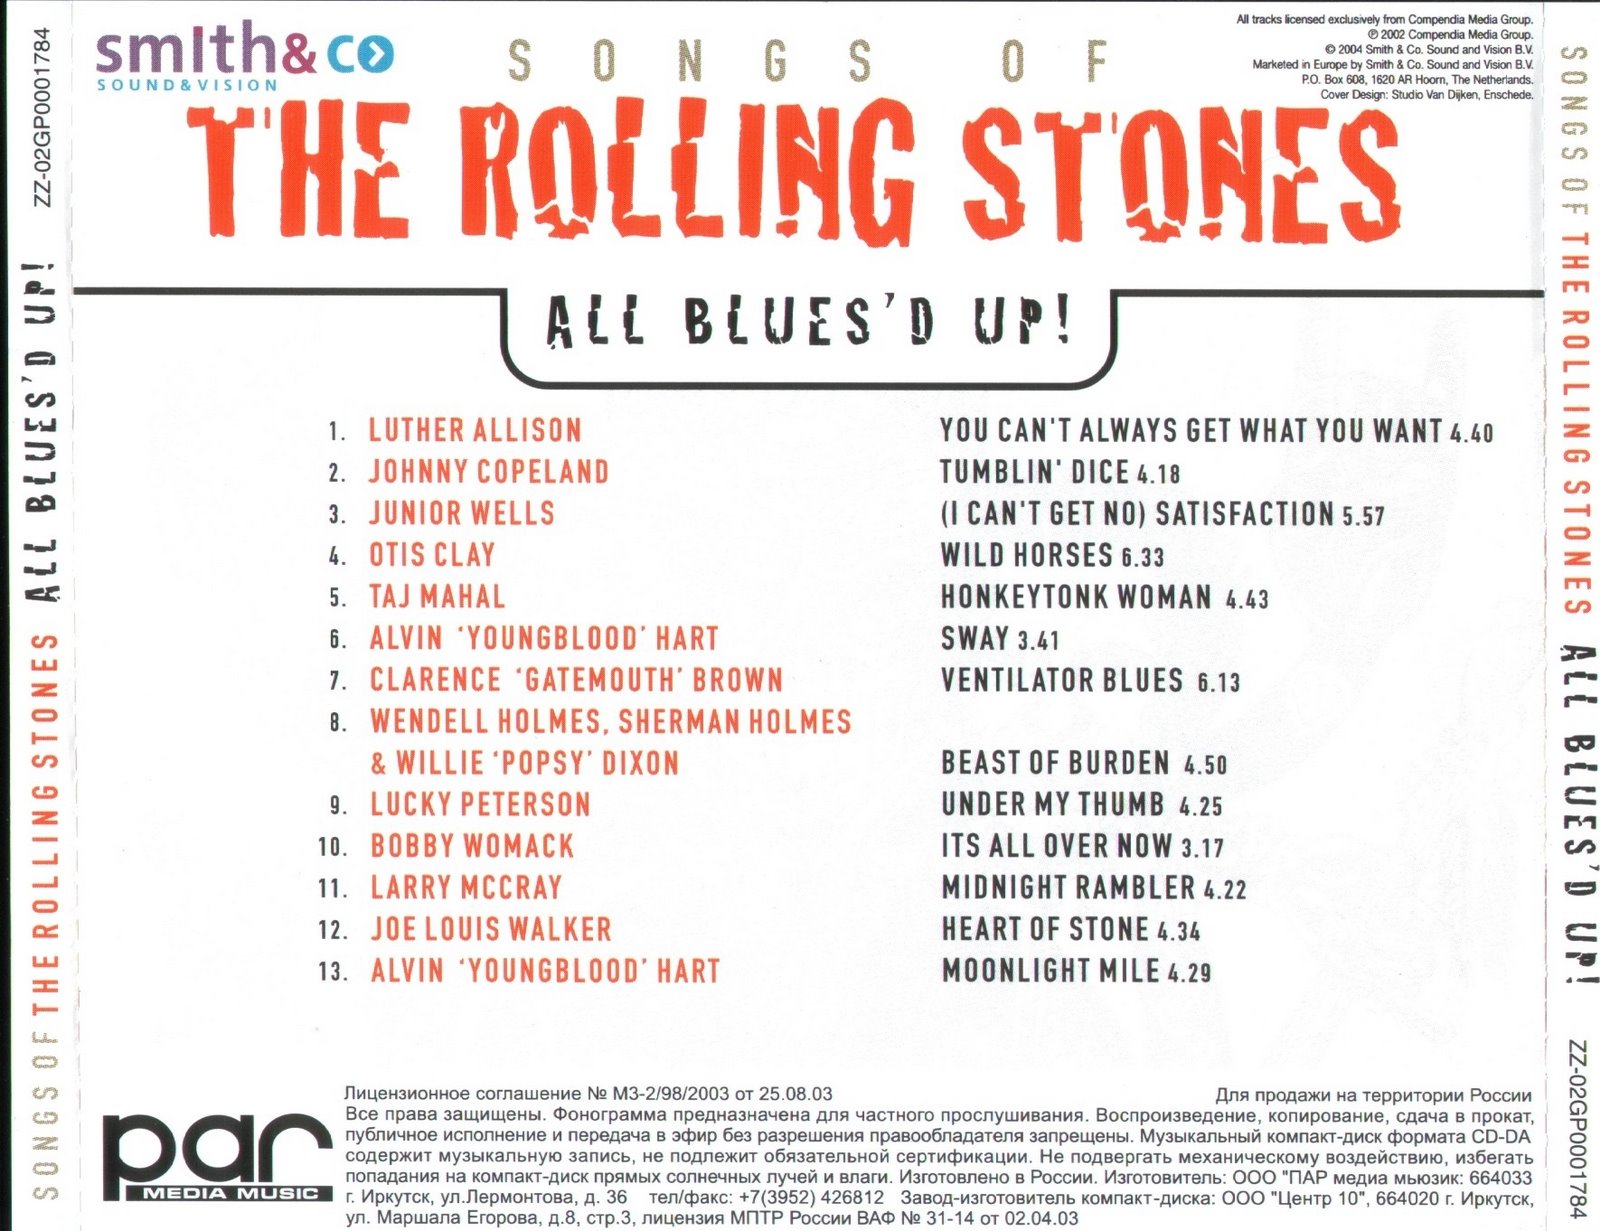 [[AllCDCovers]_rolling_stones_all_bluesd_up_the_songs_of_the_rolling_stones_2003_retail_cd-back.jpg]